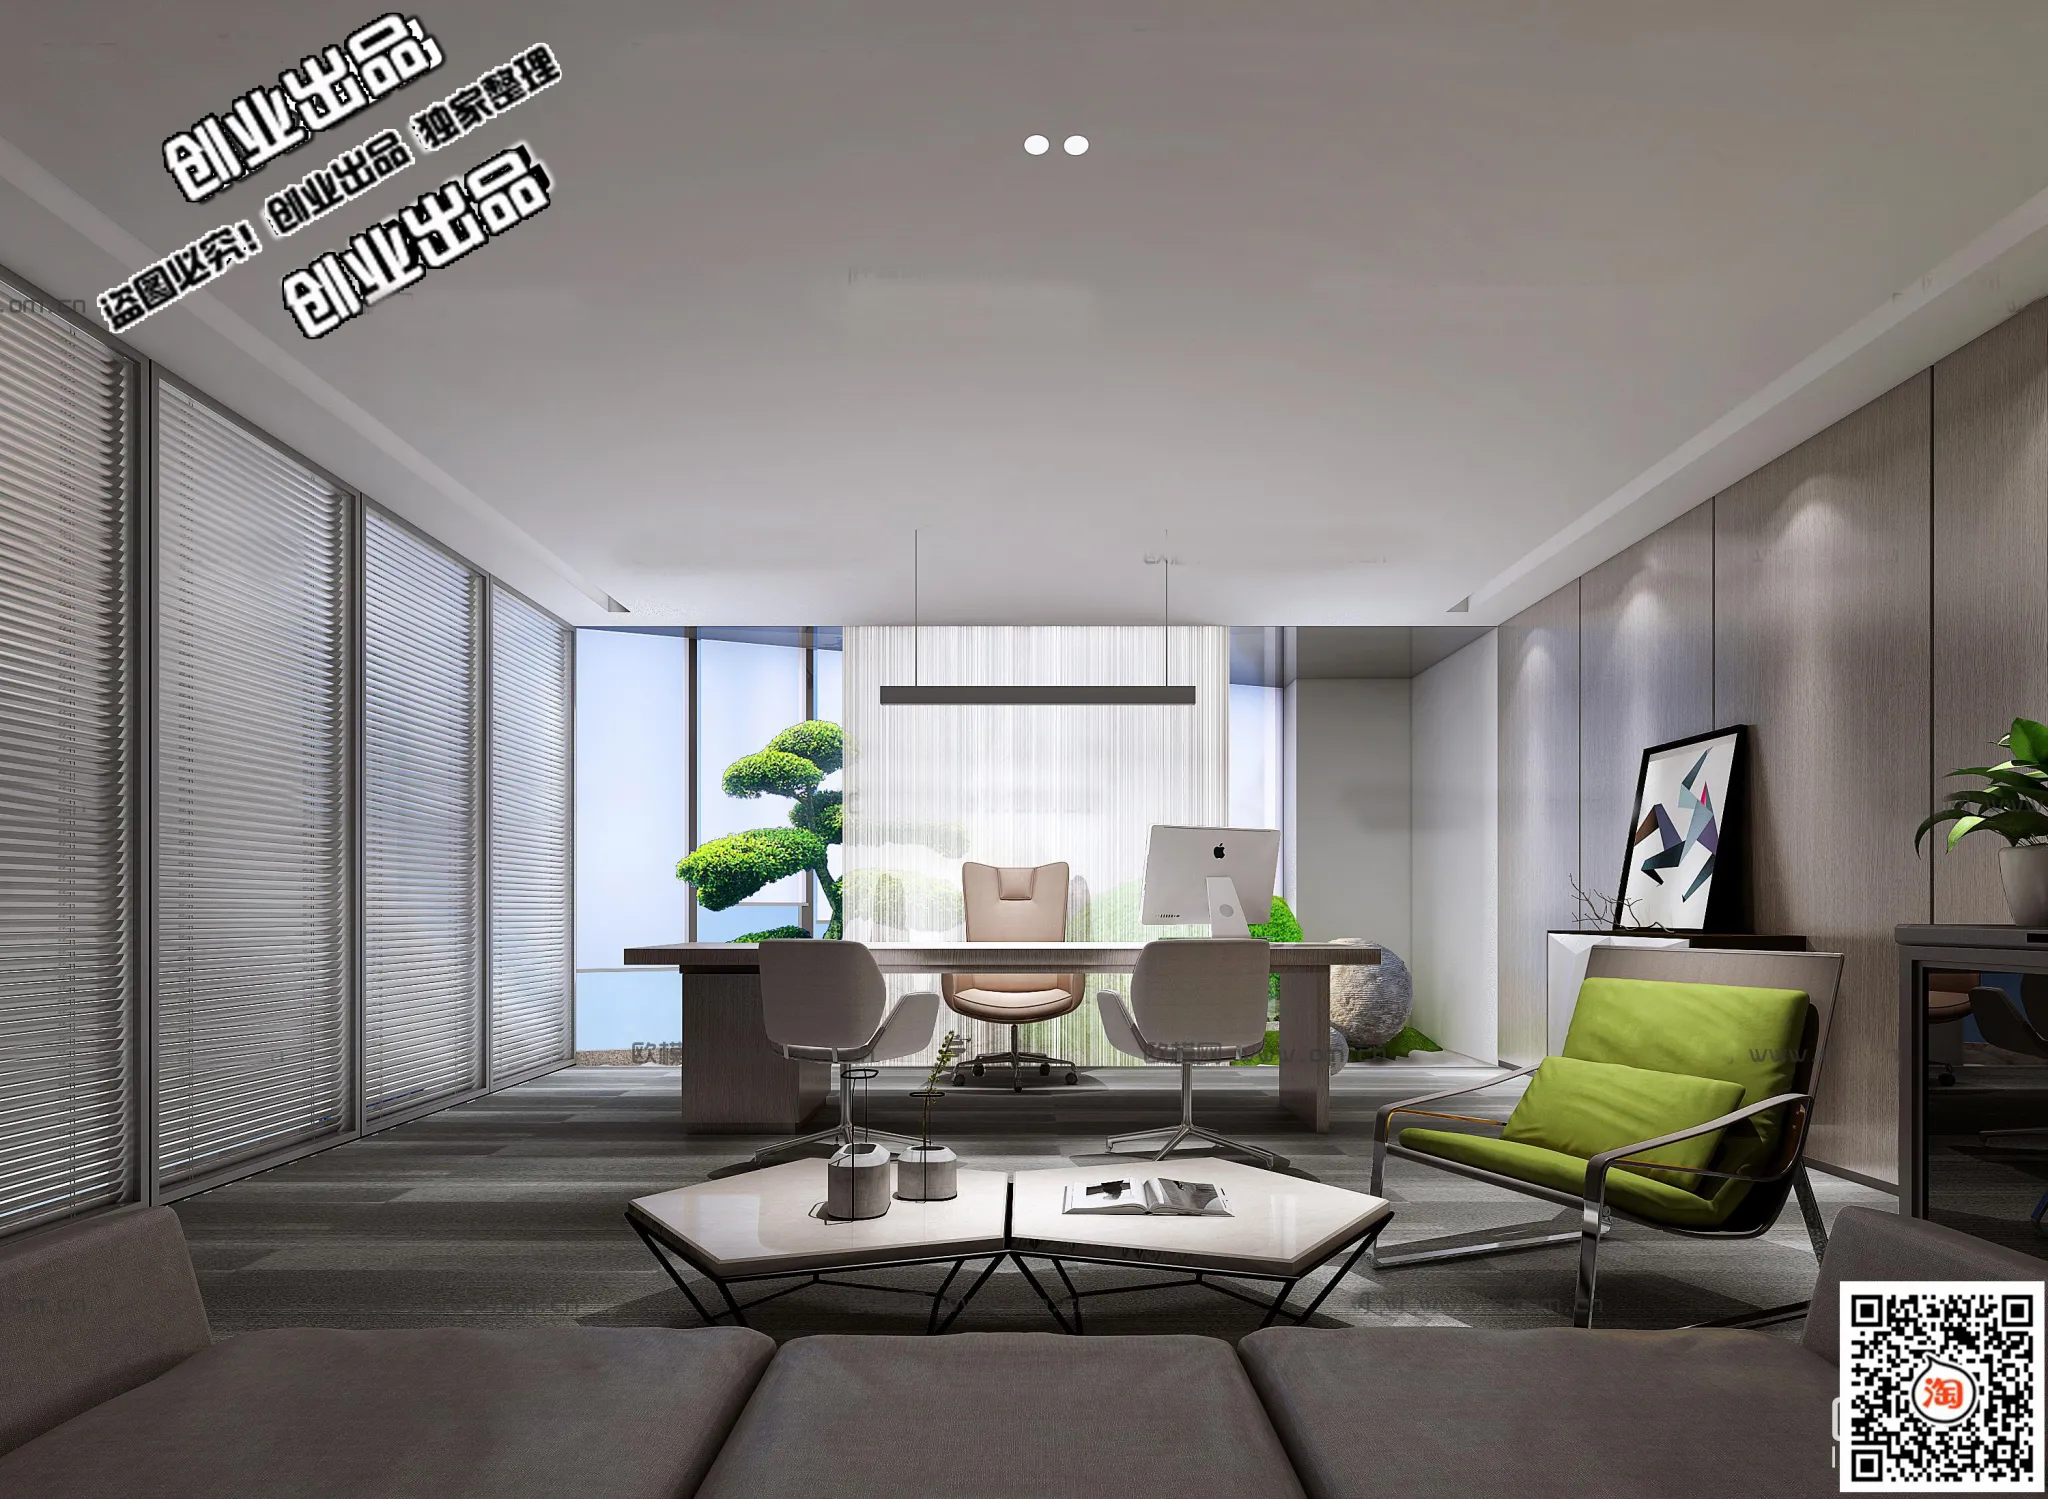 3D OFFICE INTERIOR (VRAY) – MANAGER ROOM 3D SCENES – 137